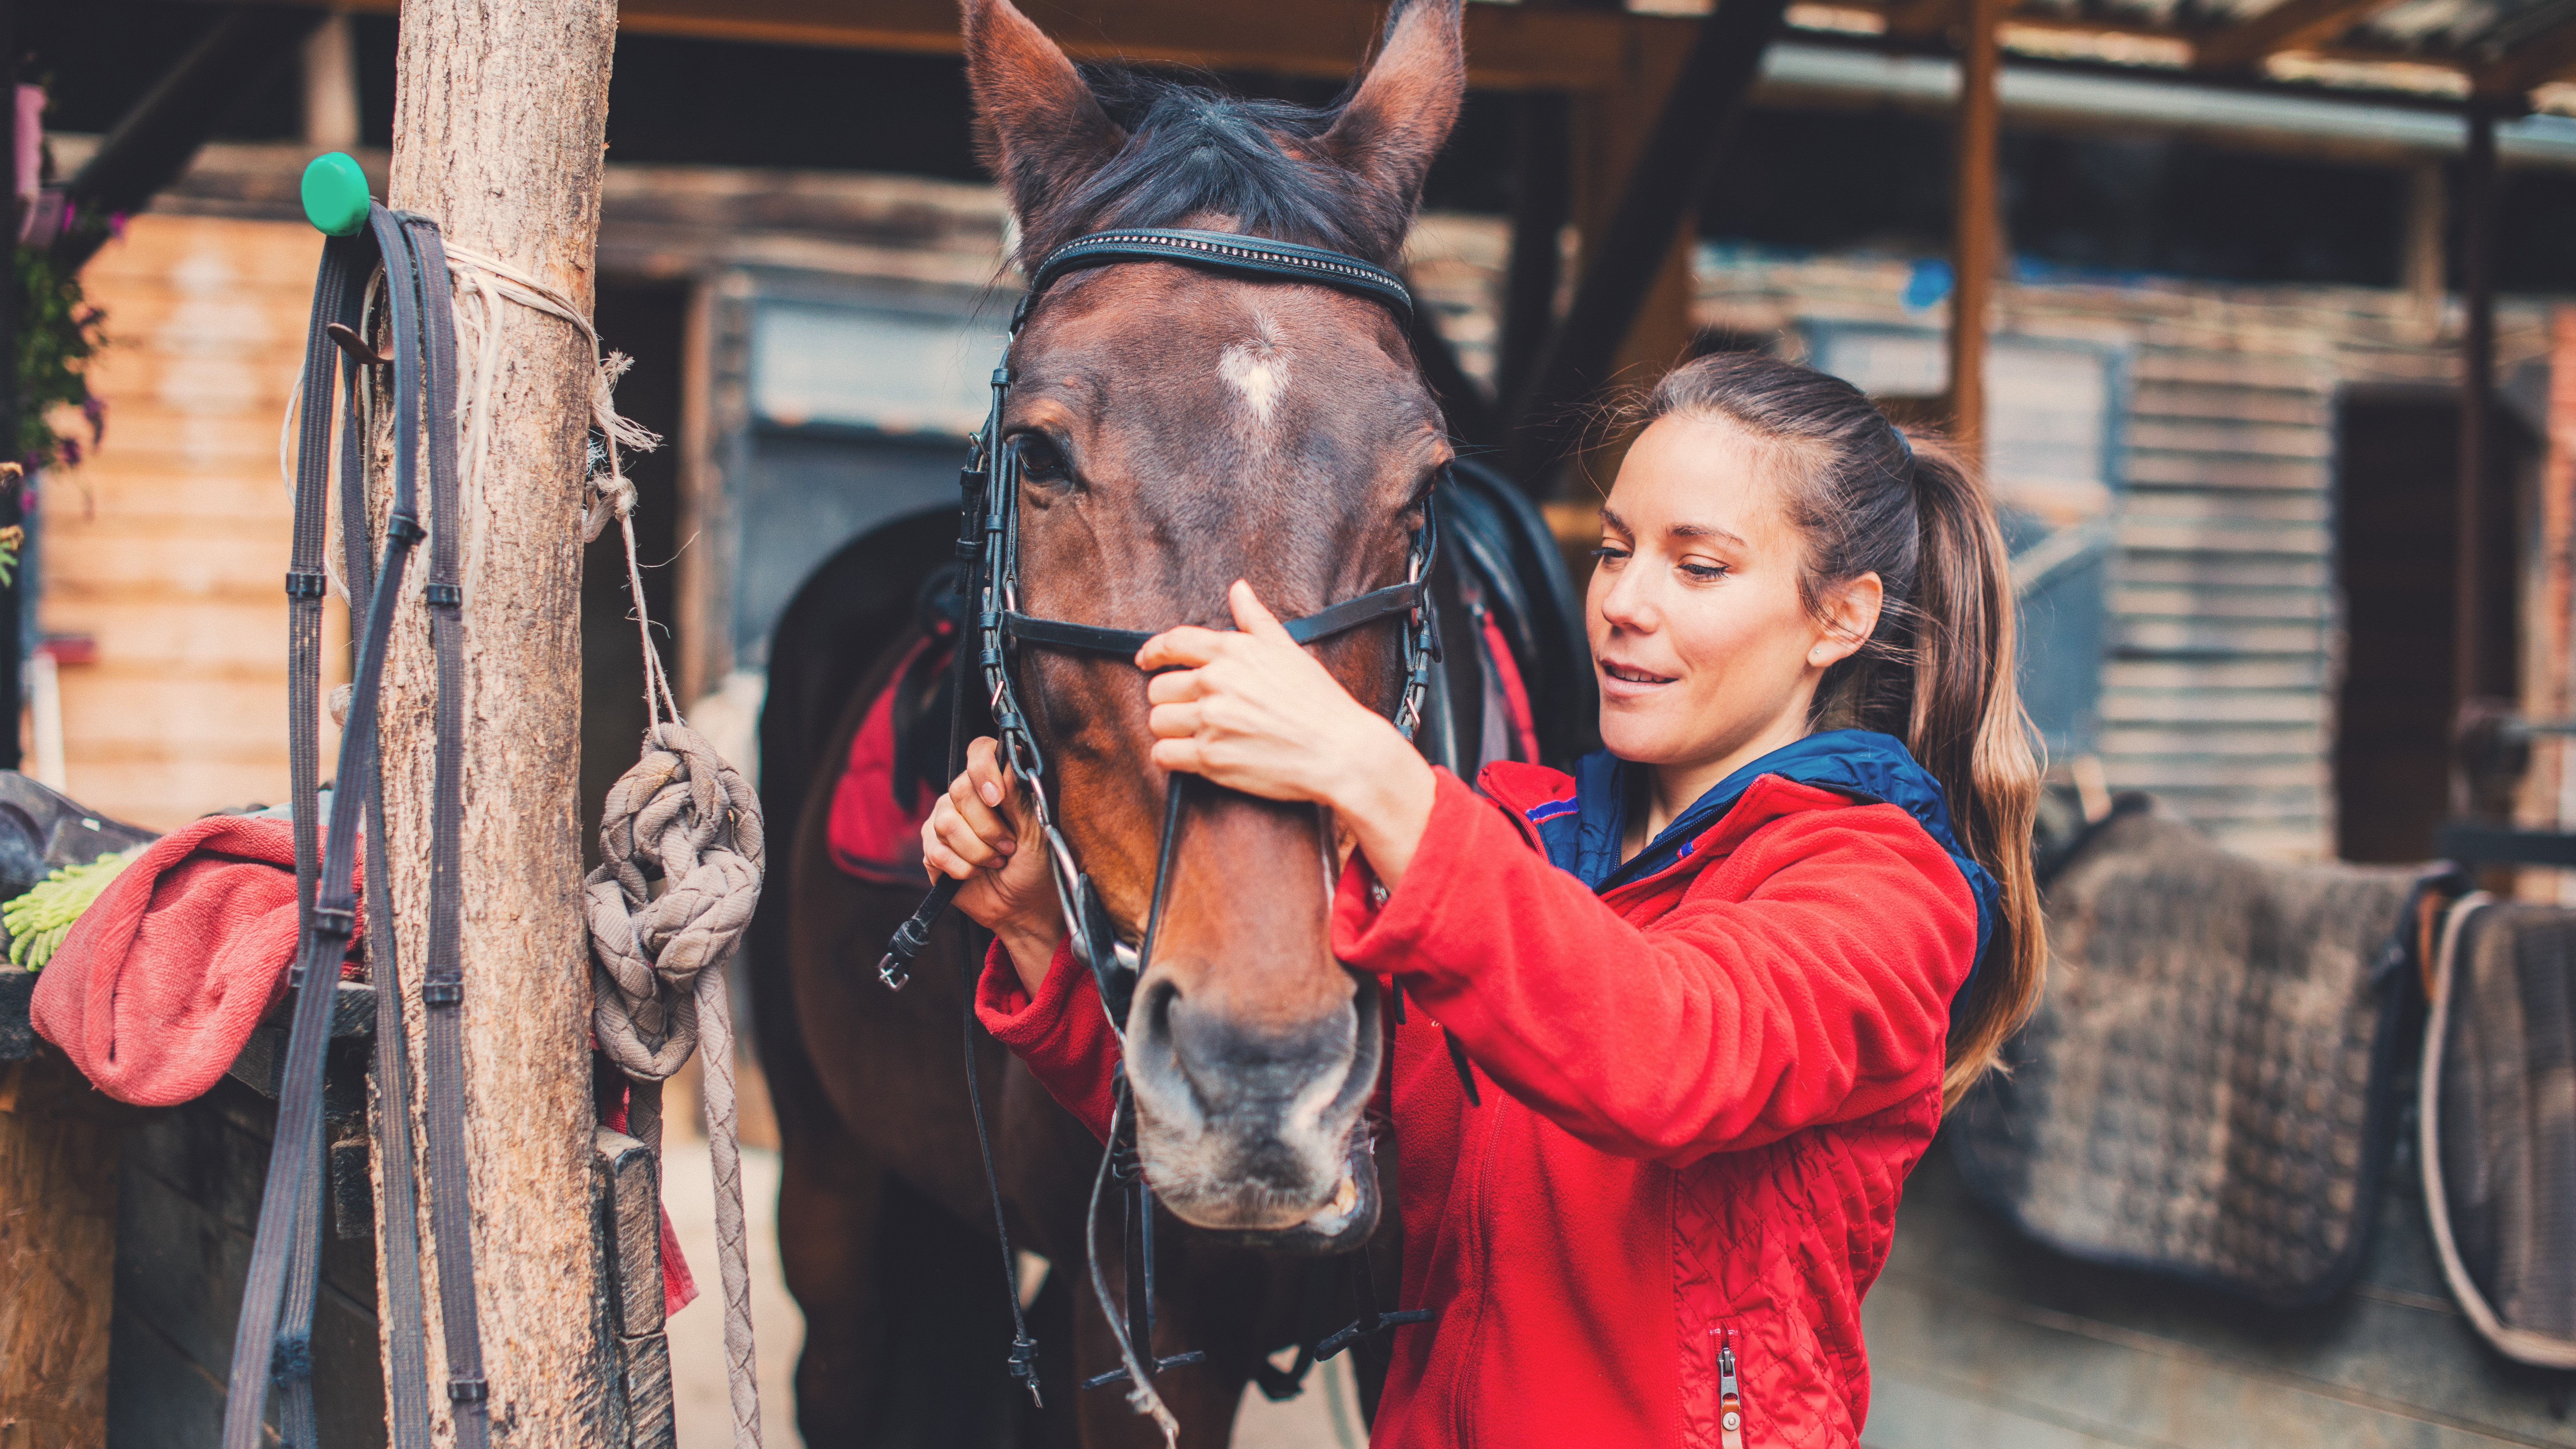 We asked a number of horse care professionals what horses need to stay healthy as we move from winter into spring.